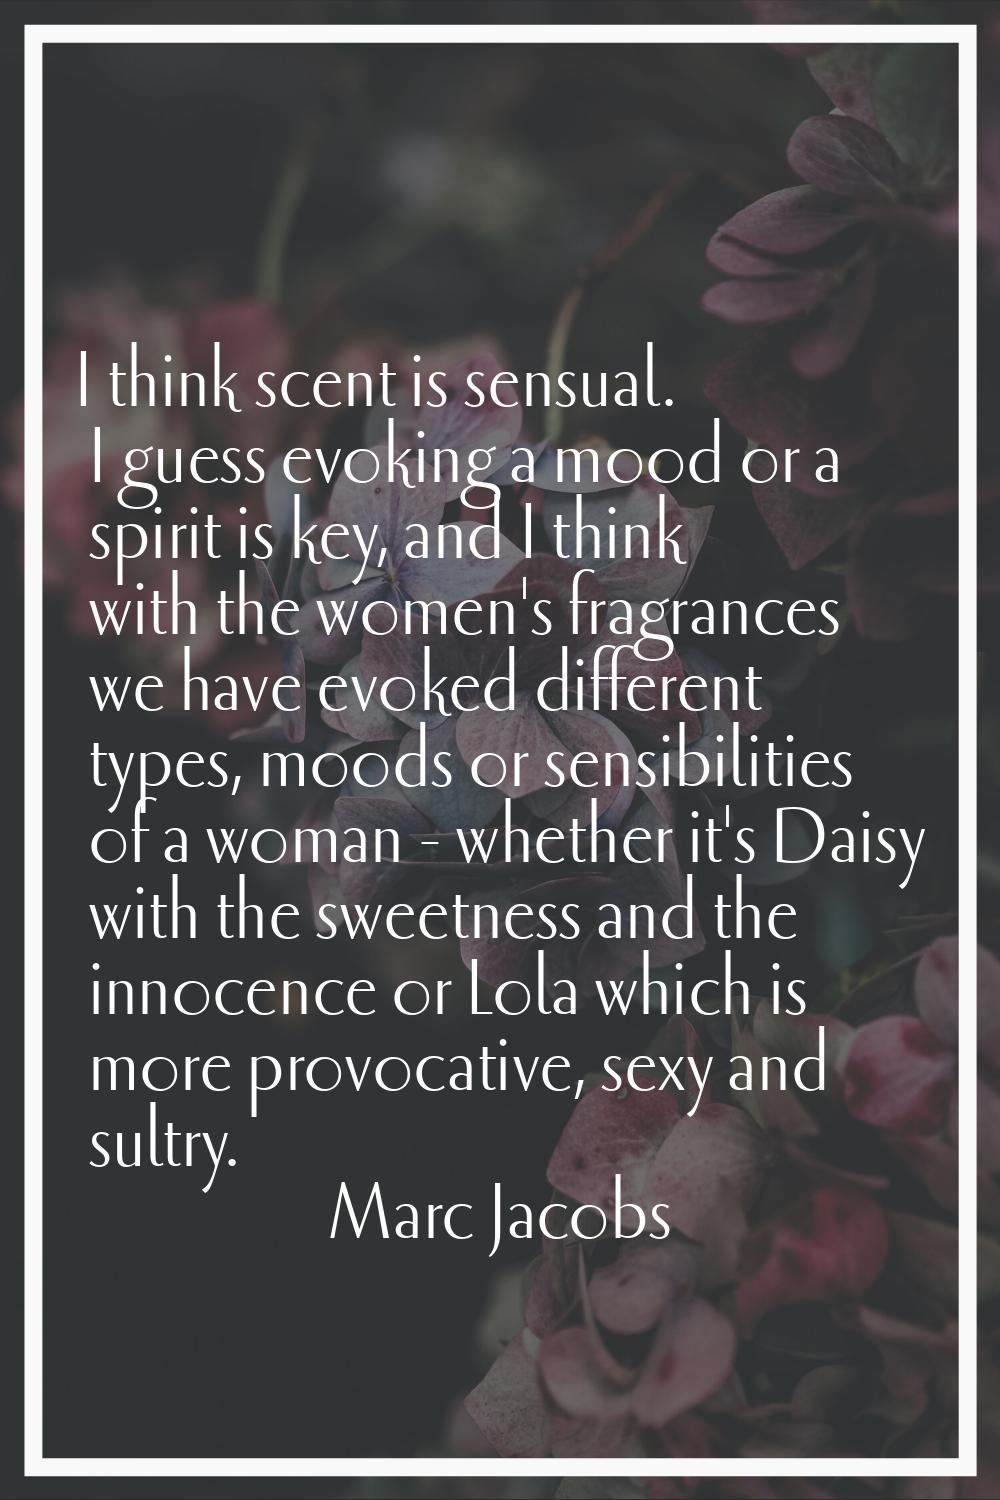 I think scent is sensual. I guess evoking a mood or a spirit is key, and I think with the women's f